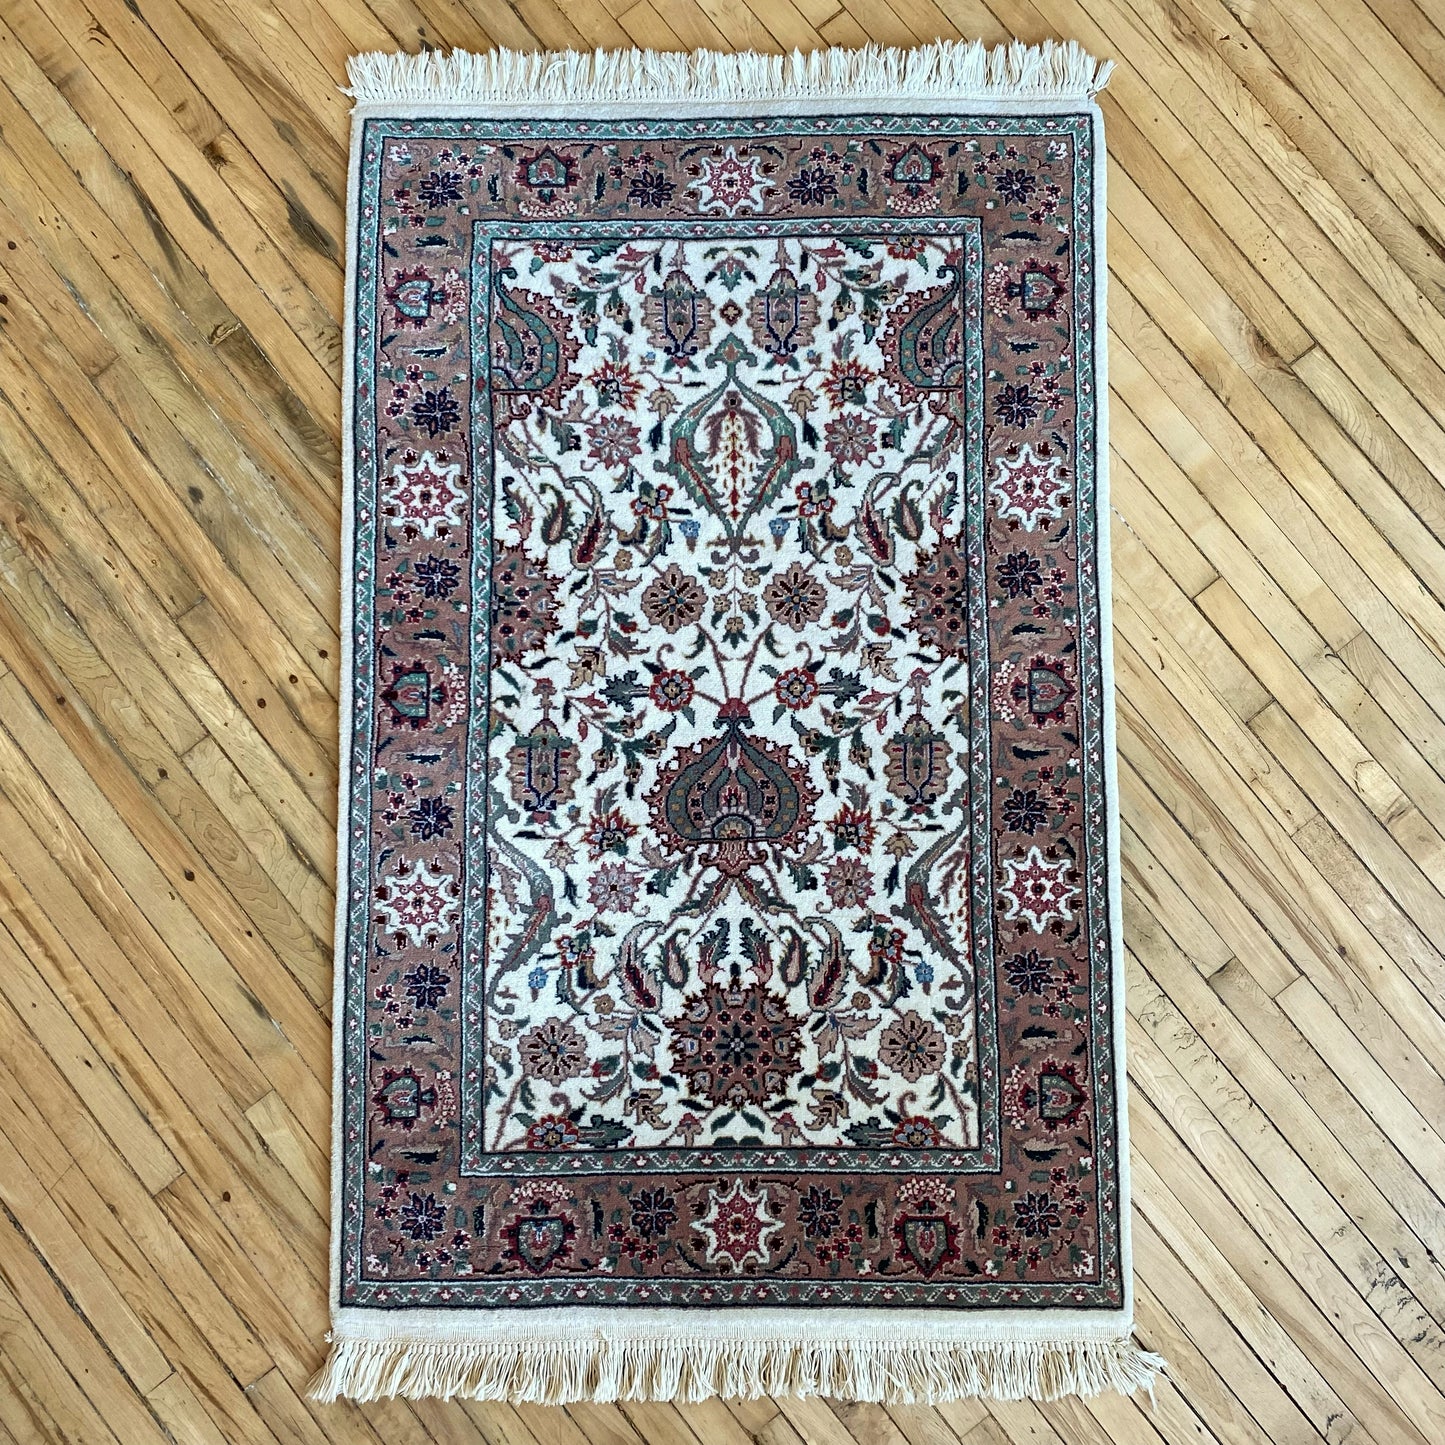 BAILEY Vintage Hand-knotted Rug (2'7" x 4'5")